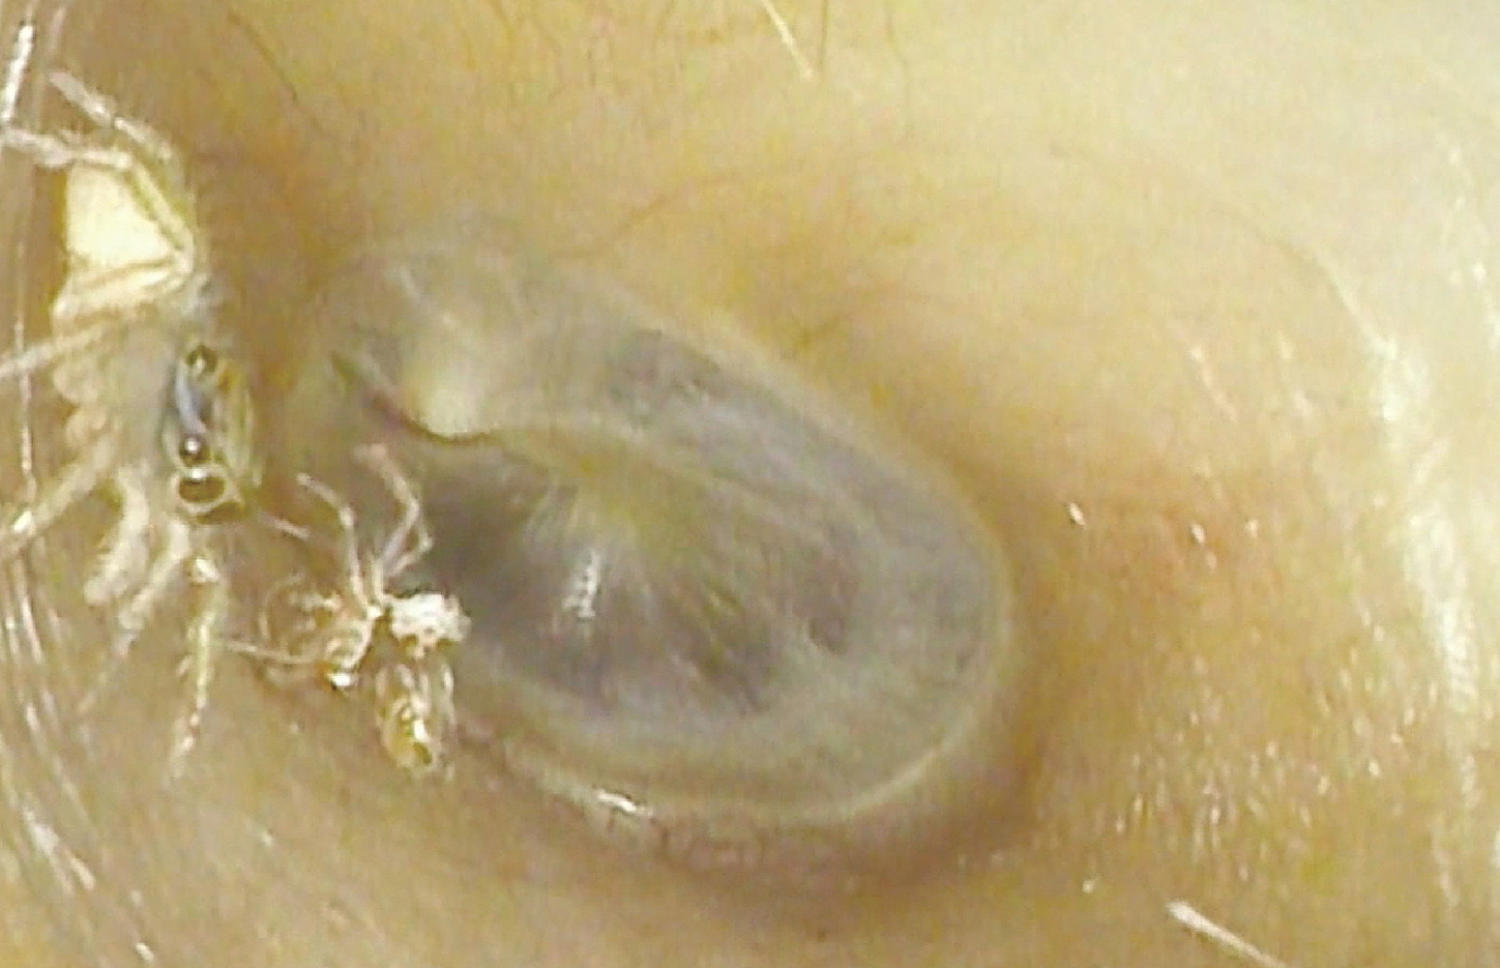 A spider was found inside a woman's ear. Such cases are rare, doctors say, but not unheard of.